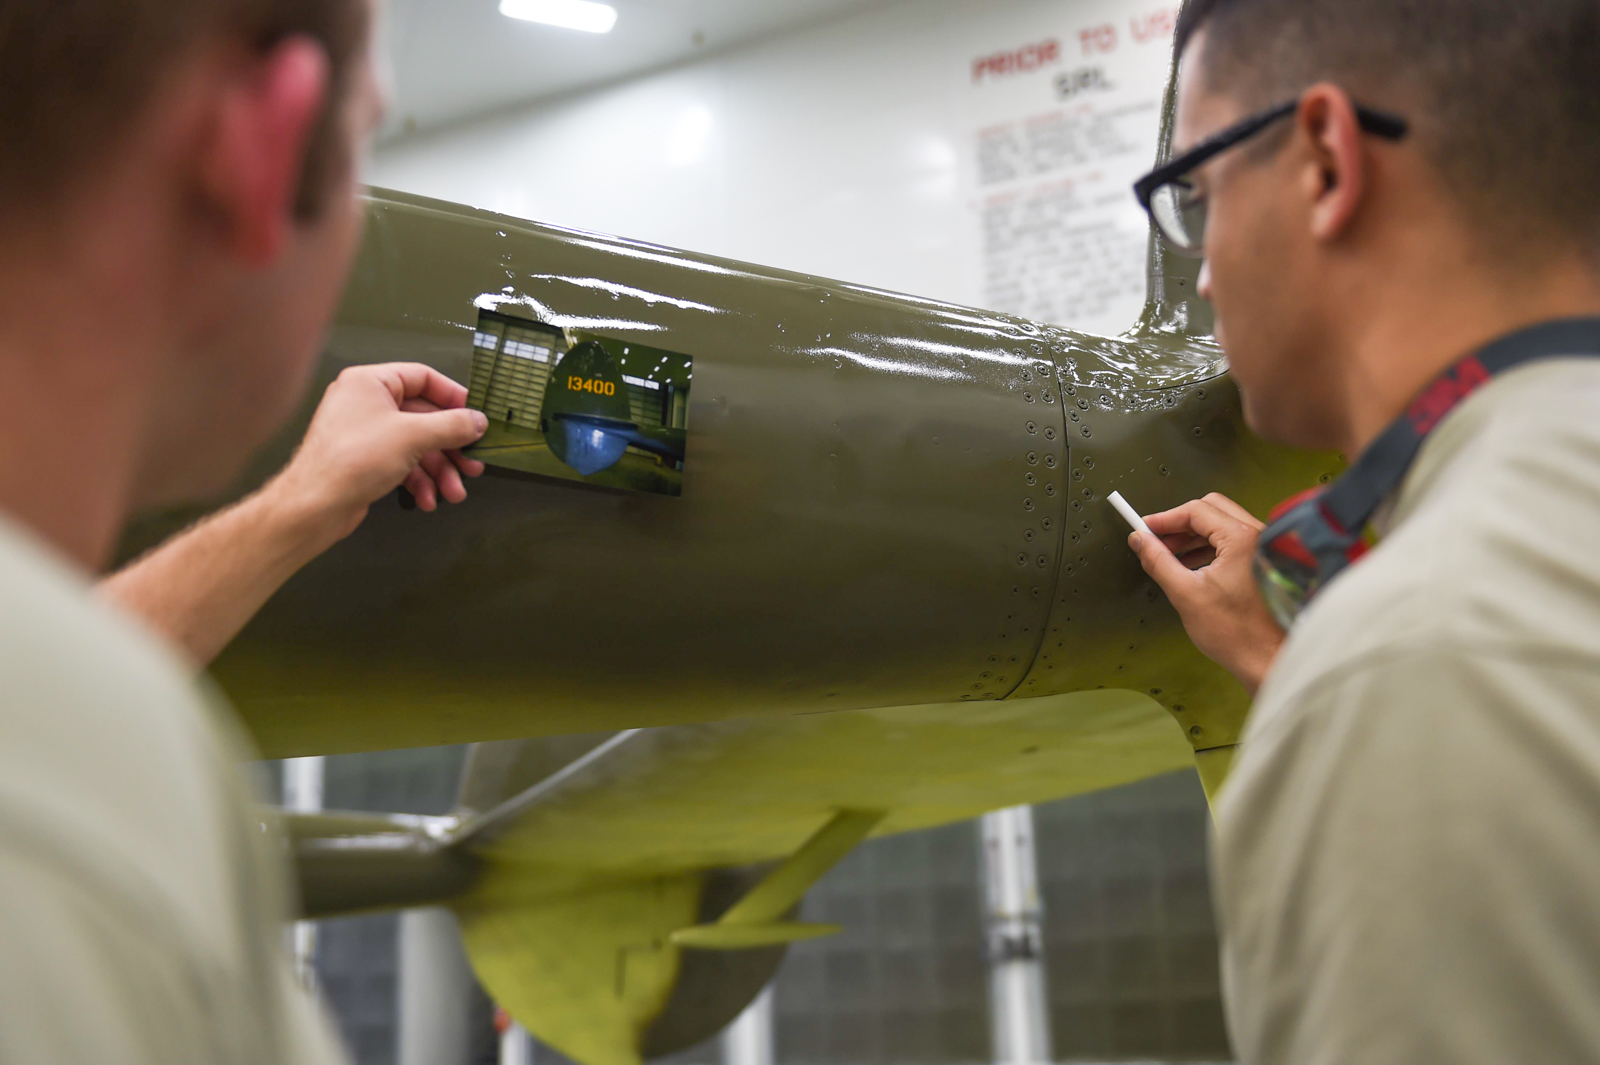 Air Force Senior Airman Kurtis Steinecke (left) and Airman 1st Class Jonathan Torres-Zaya put the final touches on the P-38G Lightning before it can be returned to the Heritage Park at Joint Base Elmendorf-Richardson, Alaska, July 20, 2017. (Photo by Staff Sgt. Sheila deVera)